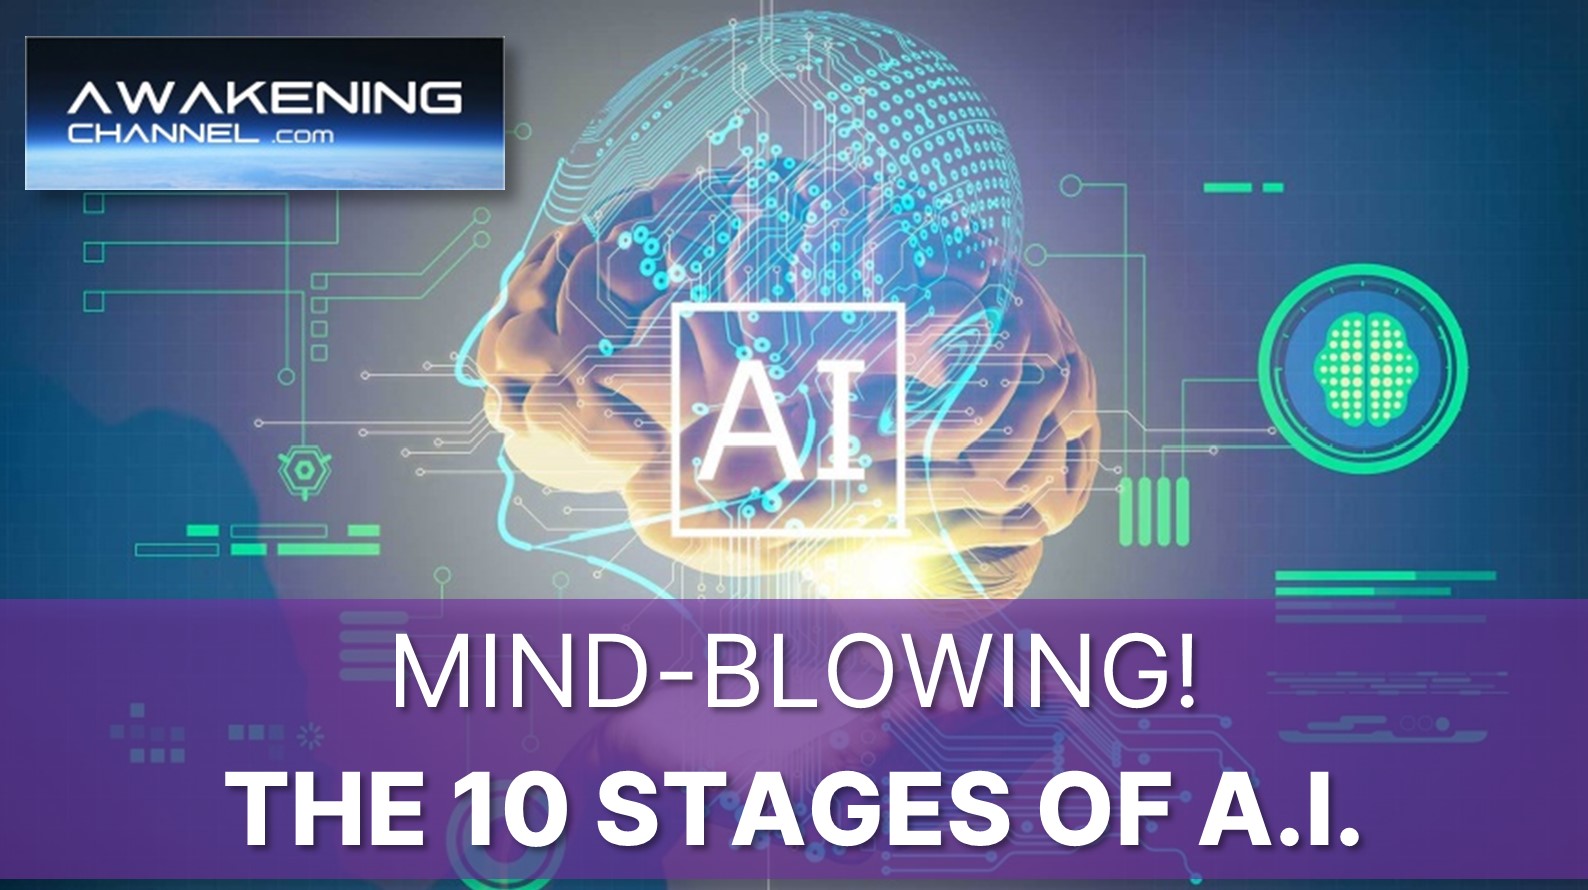 The 10 Stages of A.I.